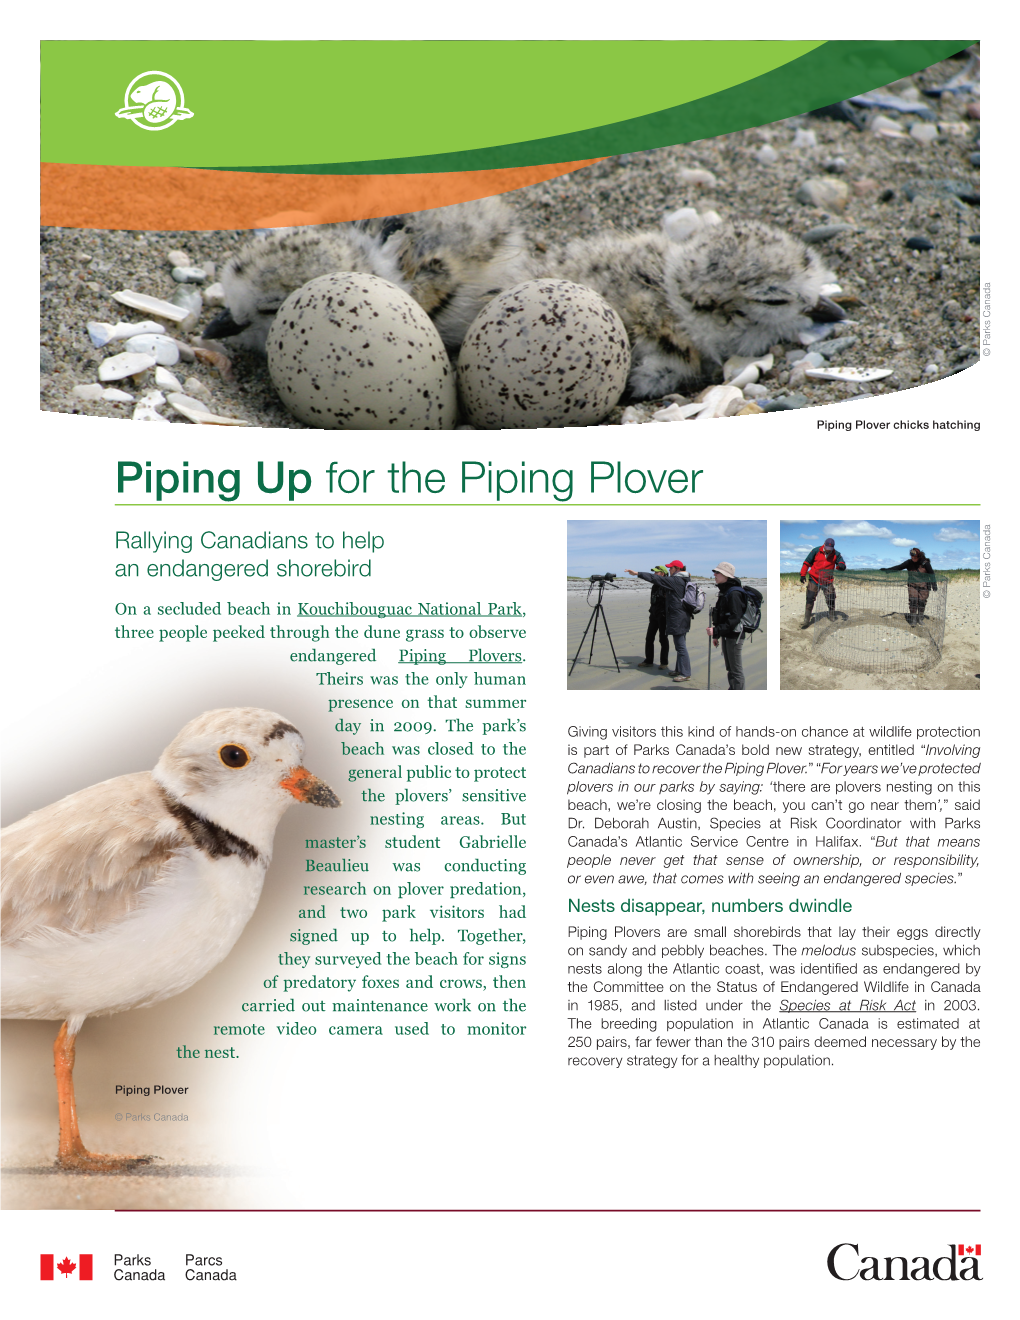 Piping up for the Piping Plover